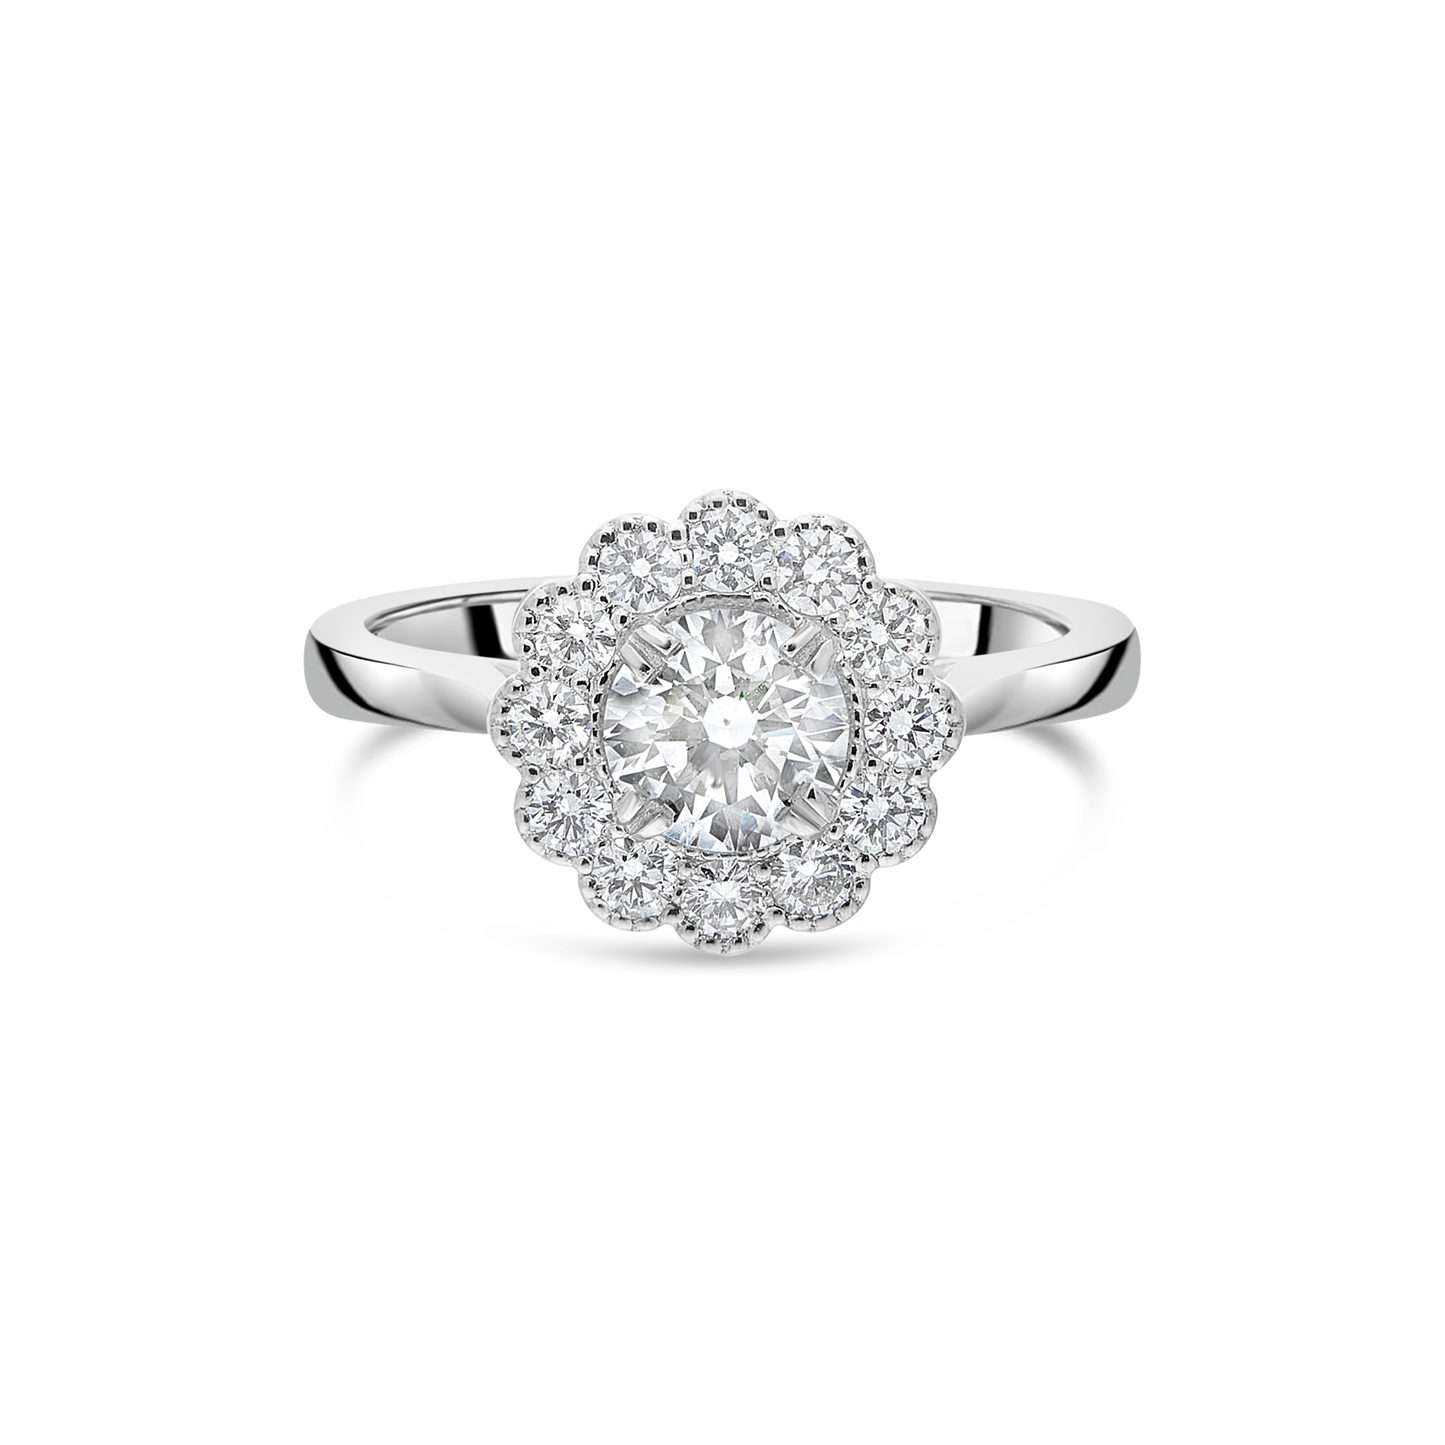 The "Kate Flower" with Round Brilliant, Platinum